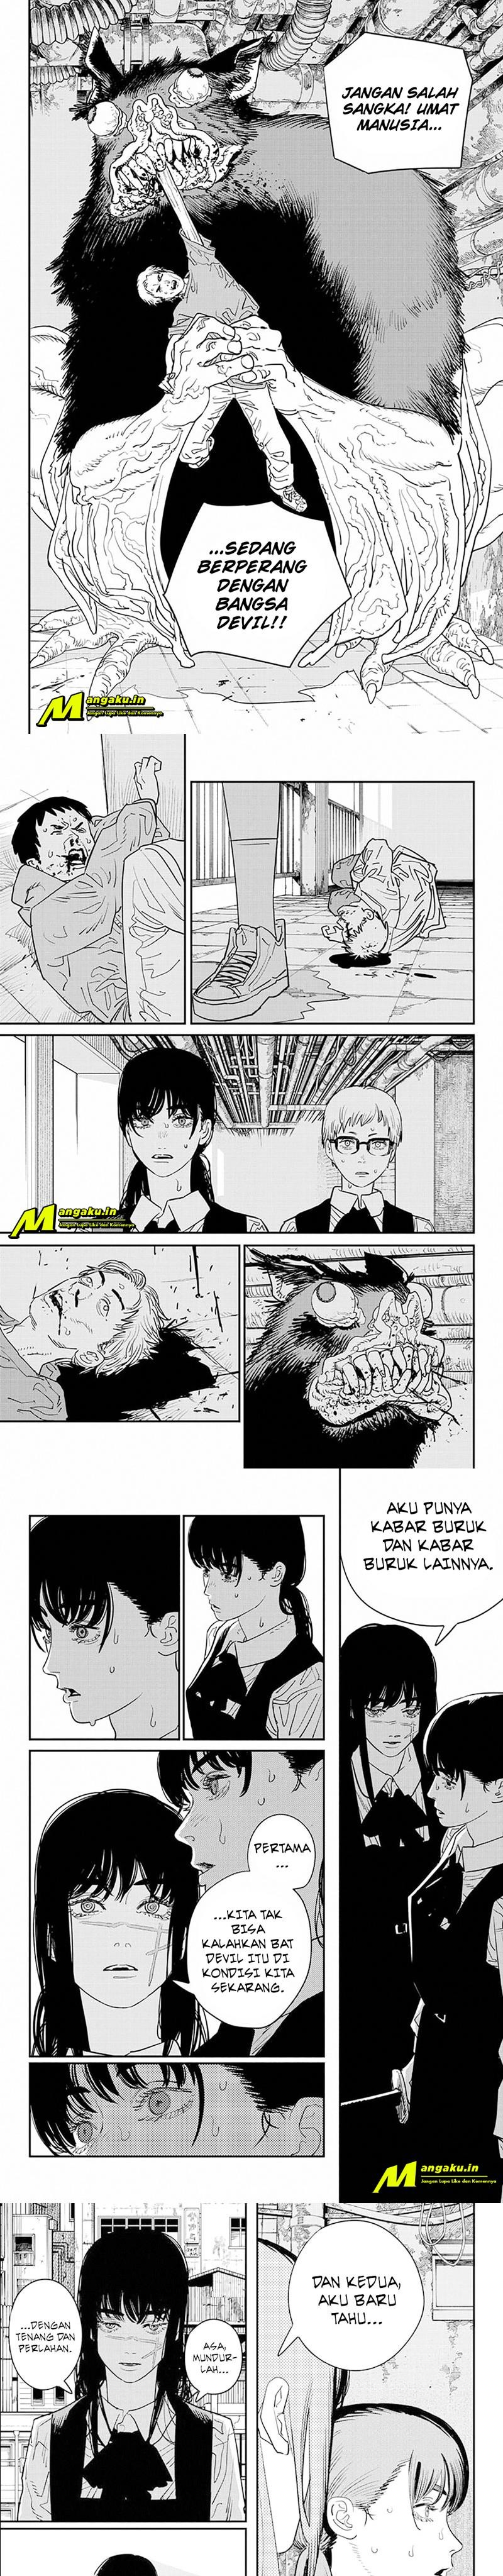 Chainsaw Man Chapter 101 6